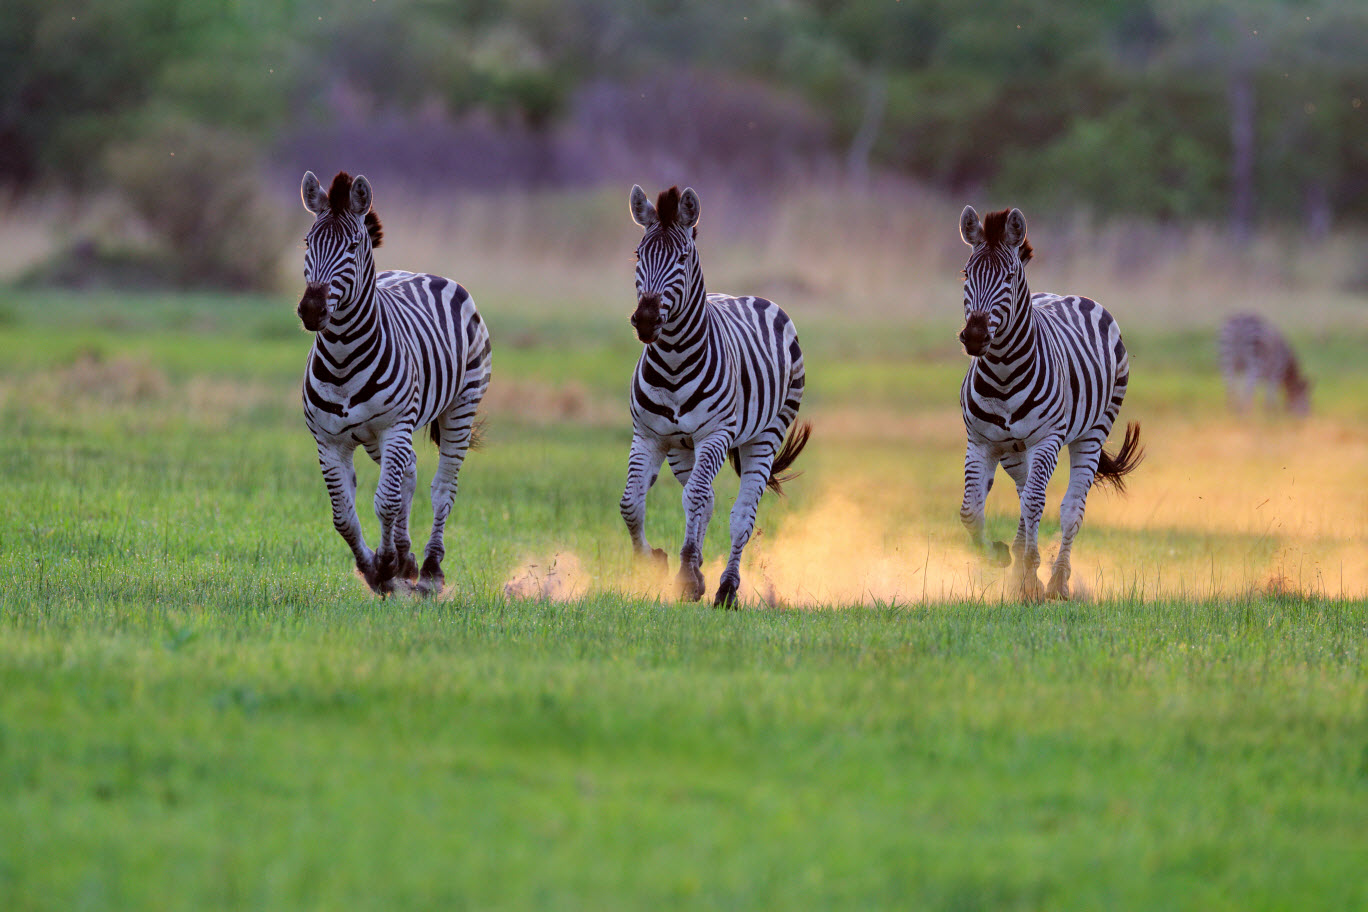 Africa Wild! We earned our stripes